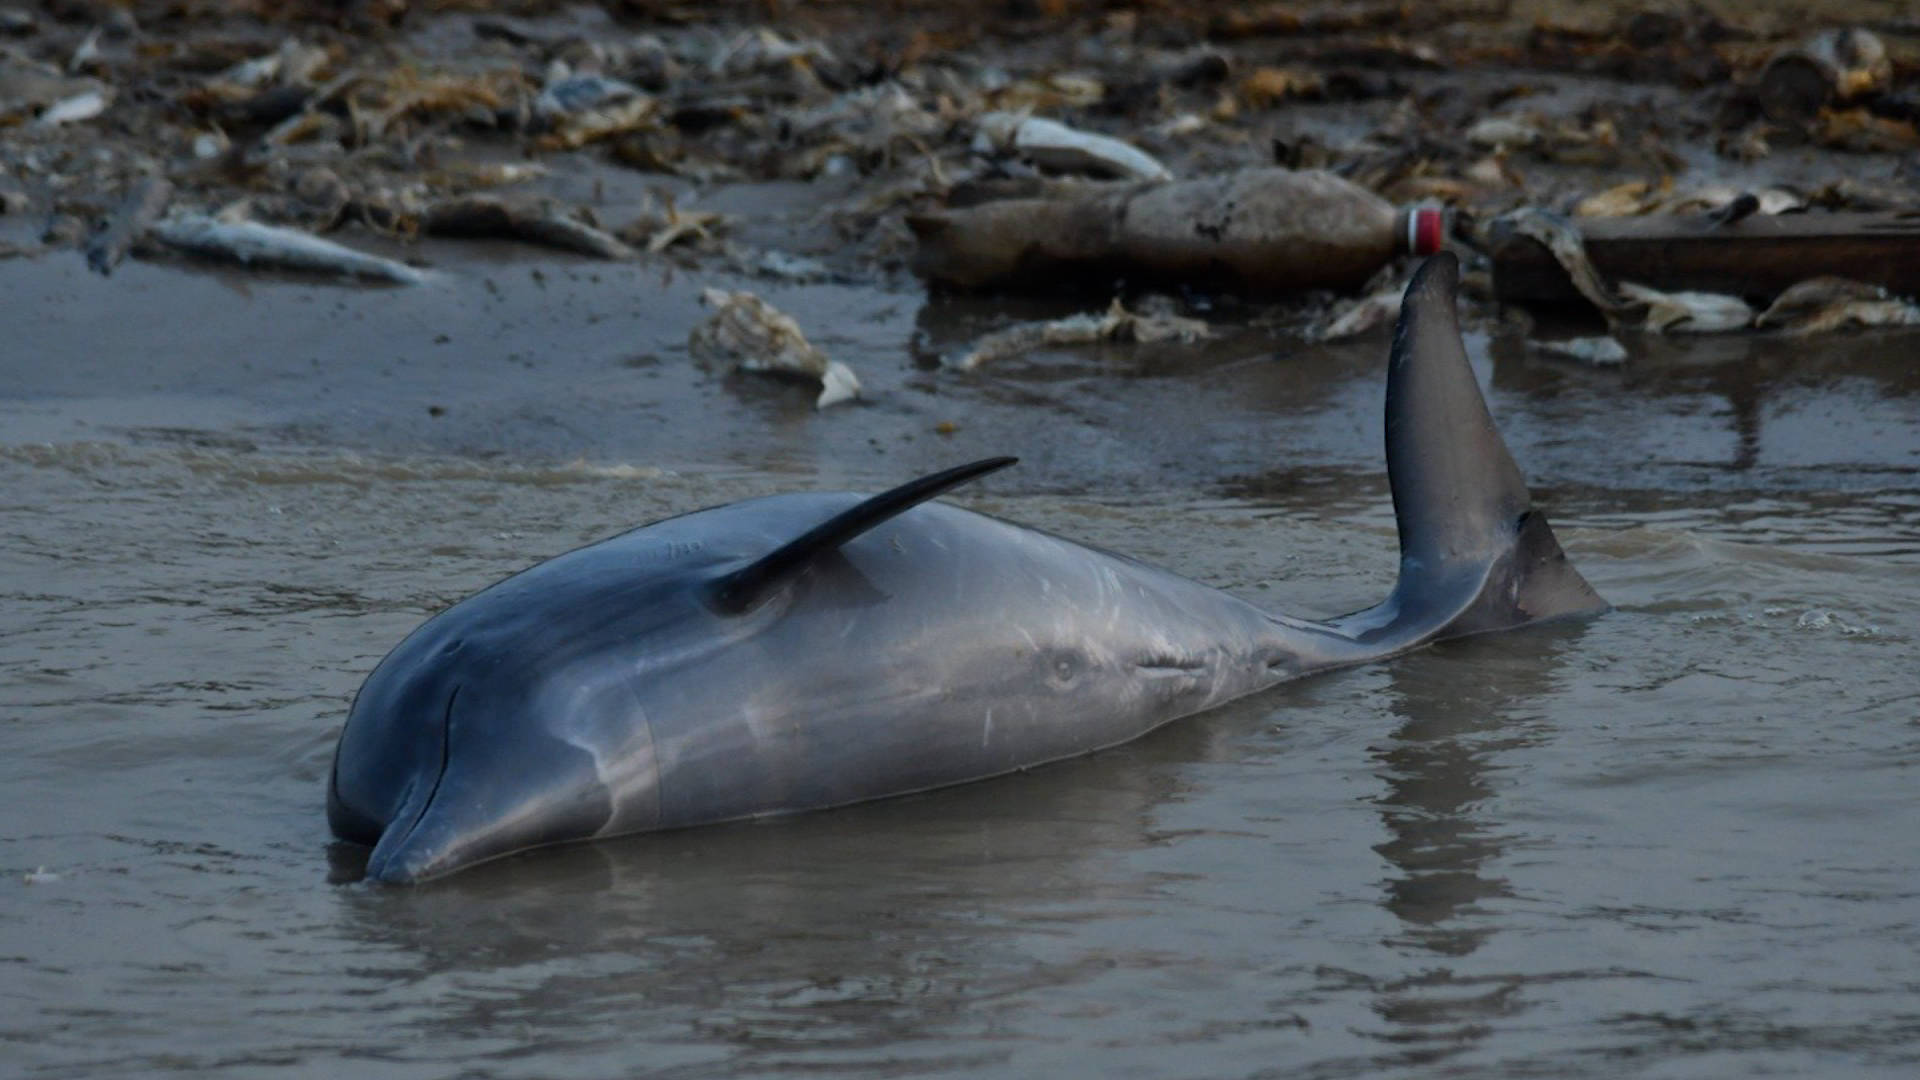 More than 100 pink dolphins are found dead in Brazil amid the Amazon River drought